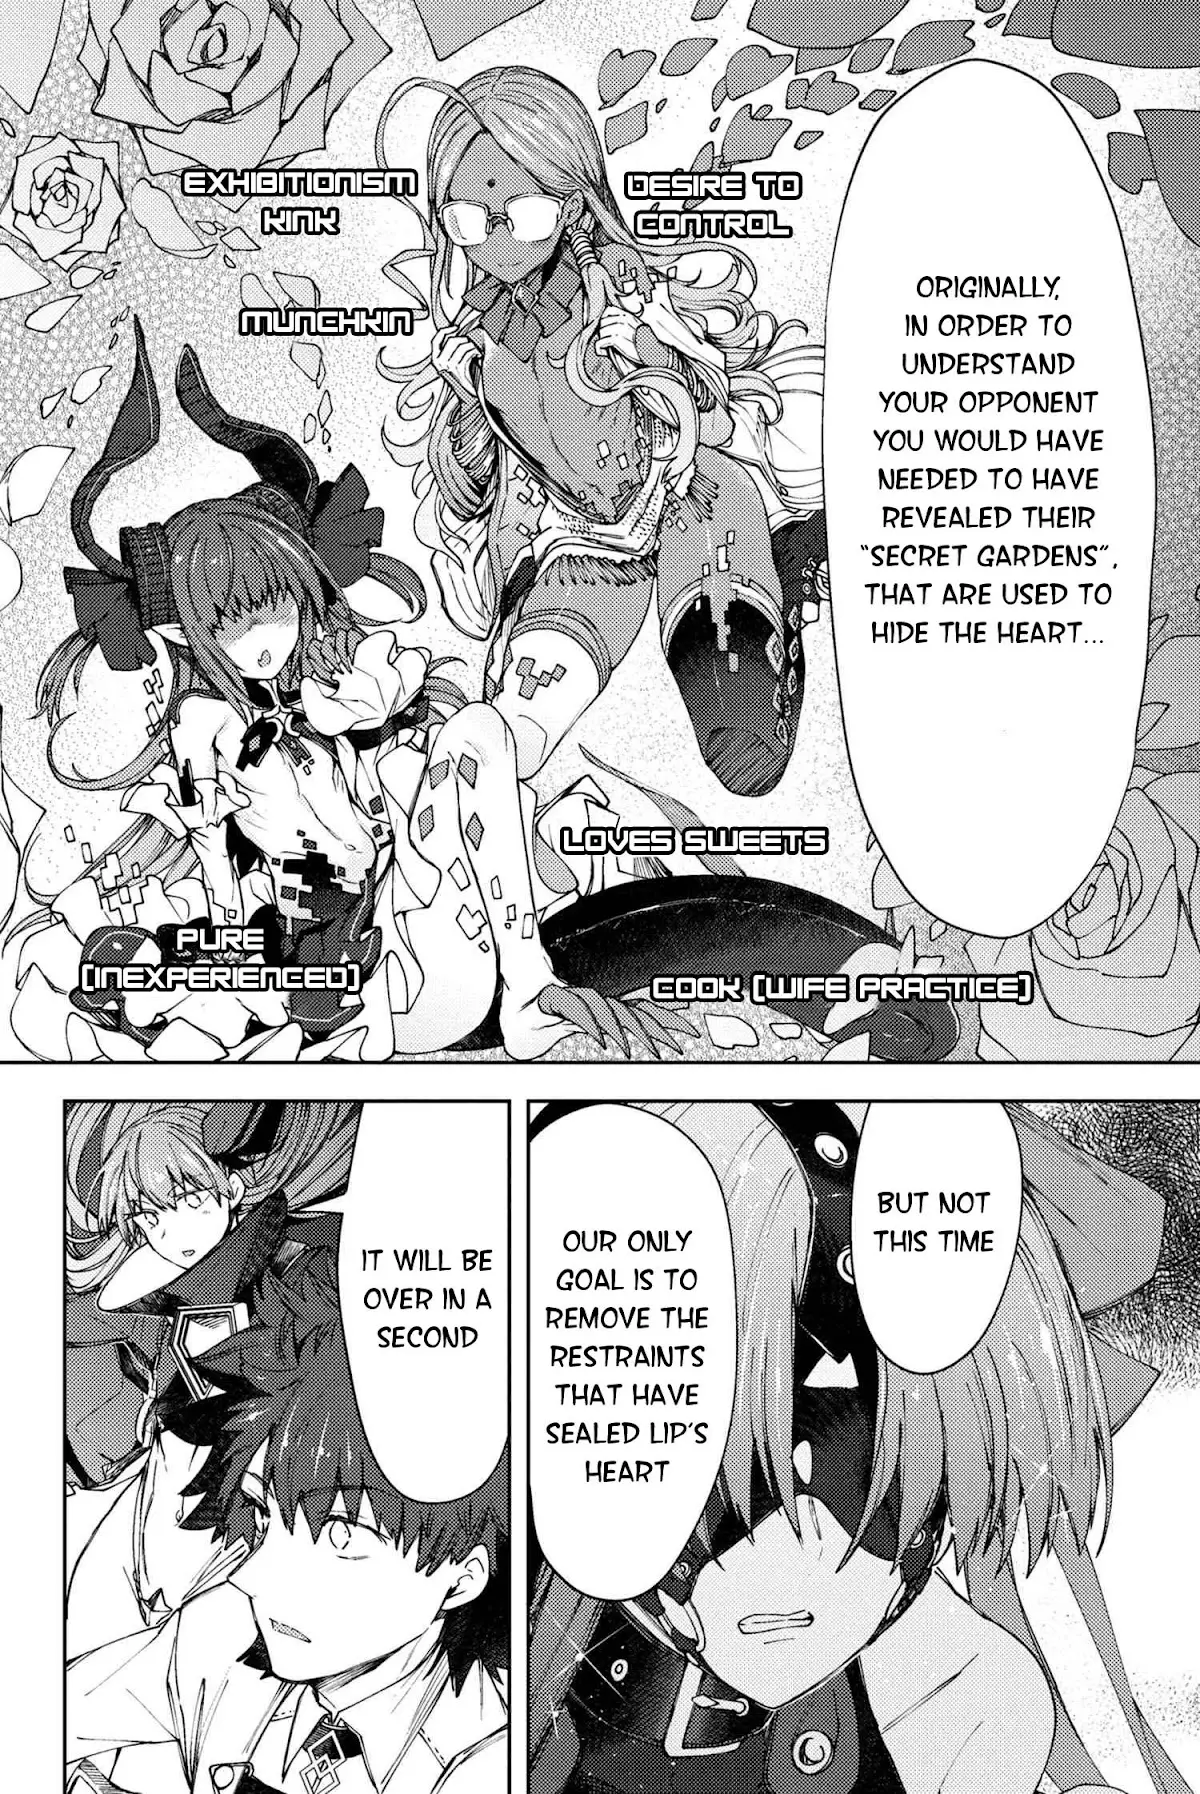 Fate/grand Order -Epic Of Remnant- Deep Sea Cyber-Paradise Se.ra.ph - 17.1 page 3-61df22b6